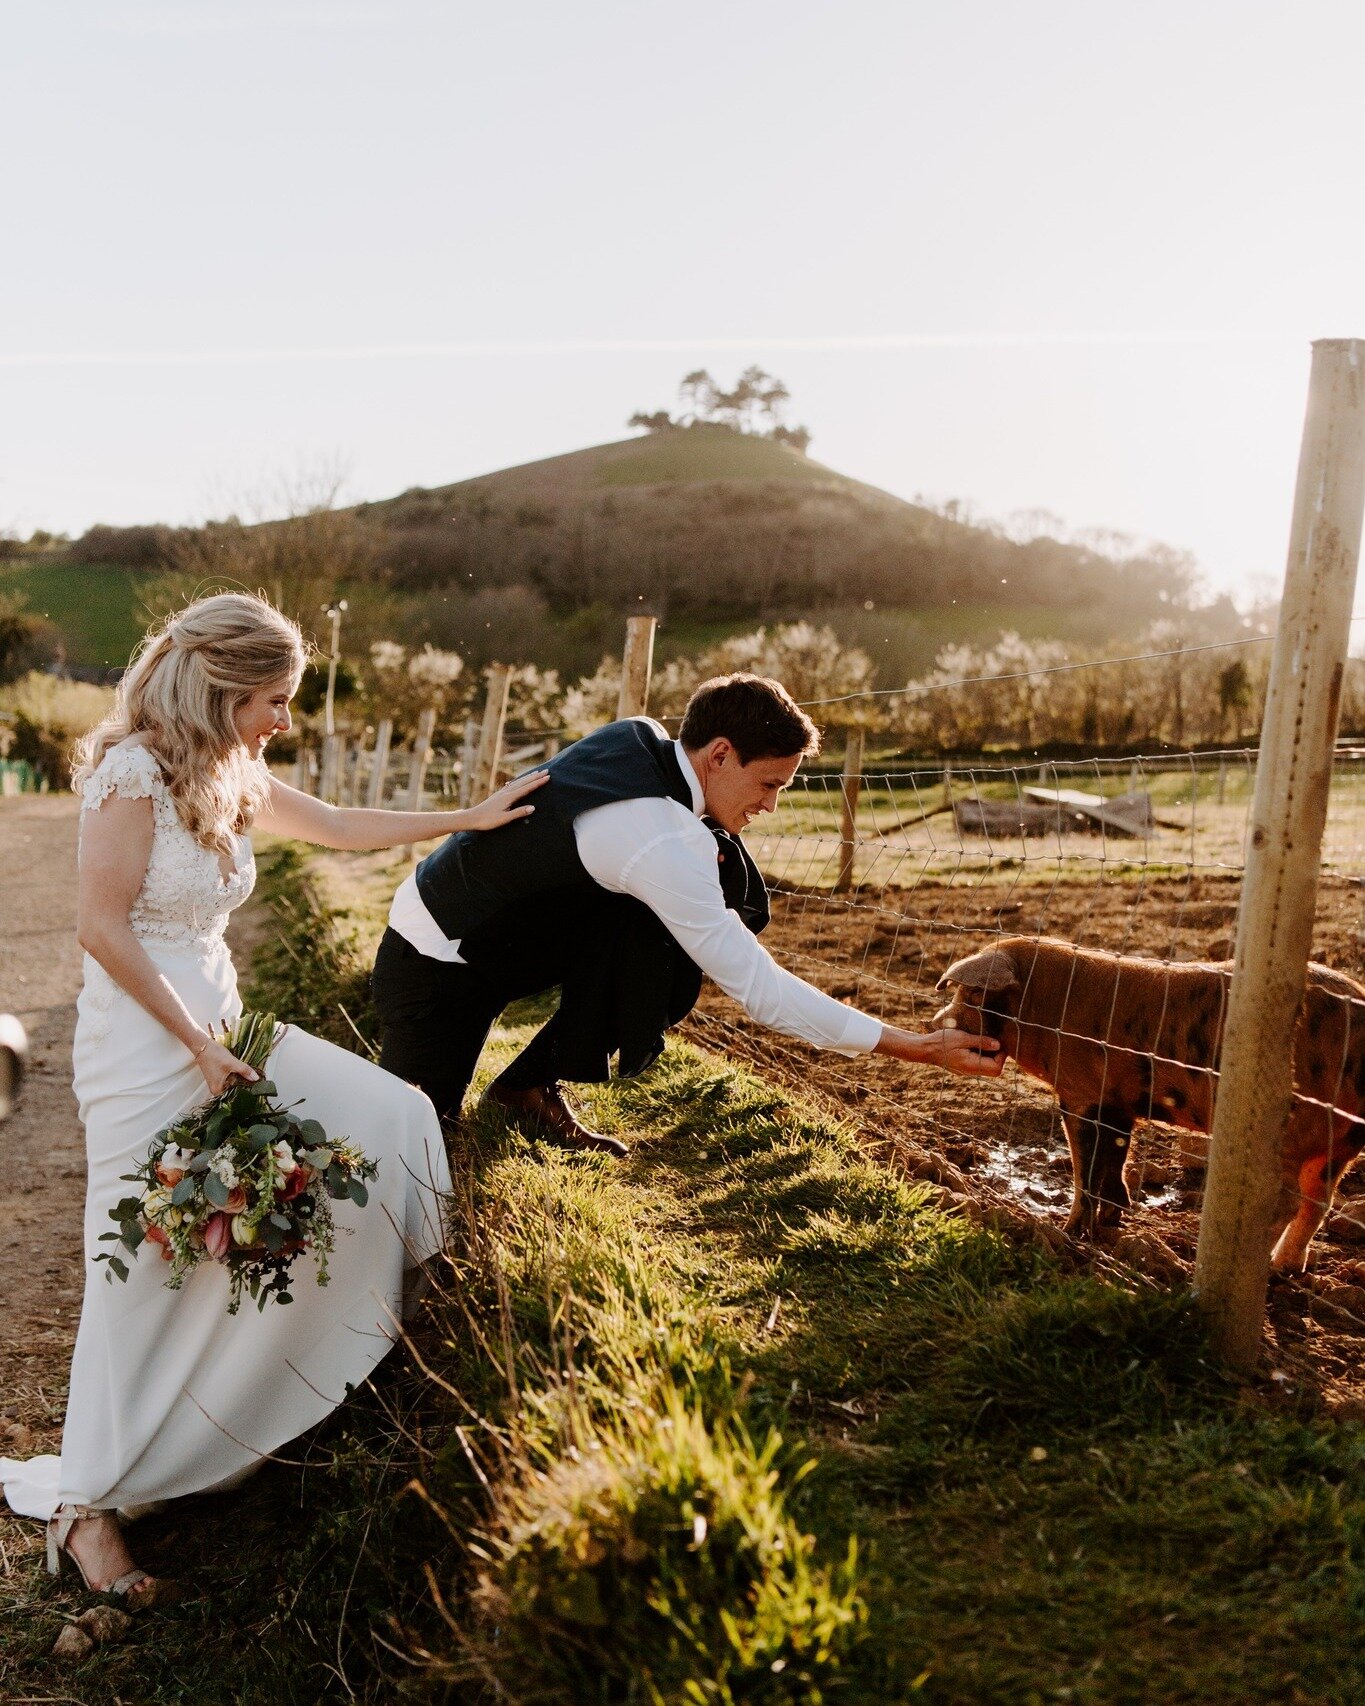 Team SOP are literally a stones throw away from each other today watching and capturing so many wedding dreams come true at 2 of our fave venues.
Sadie doing her thing at @symondsburyestate  and Kirsty back at the awesome @hopefarmdorset 
Have a fabu